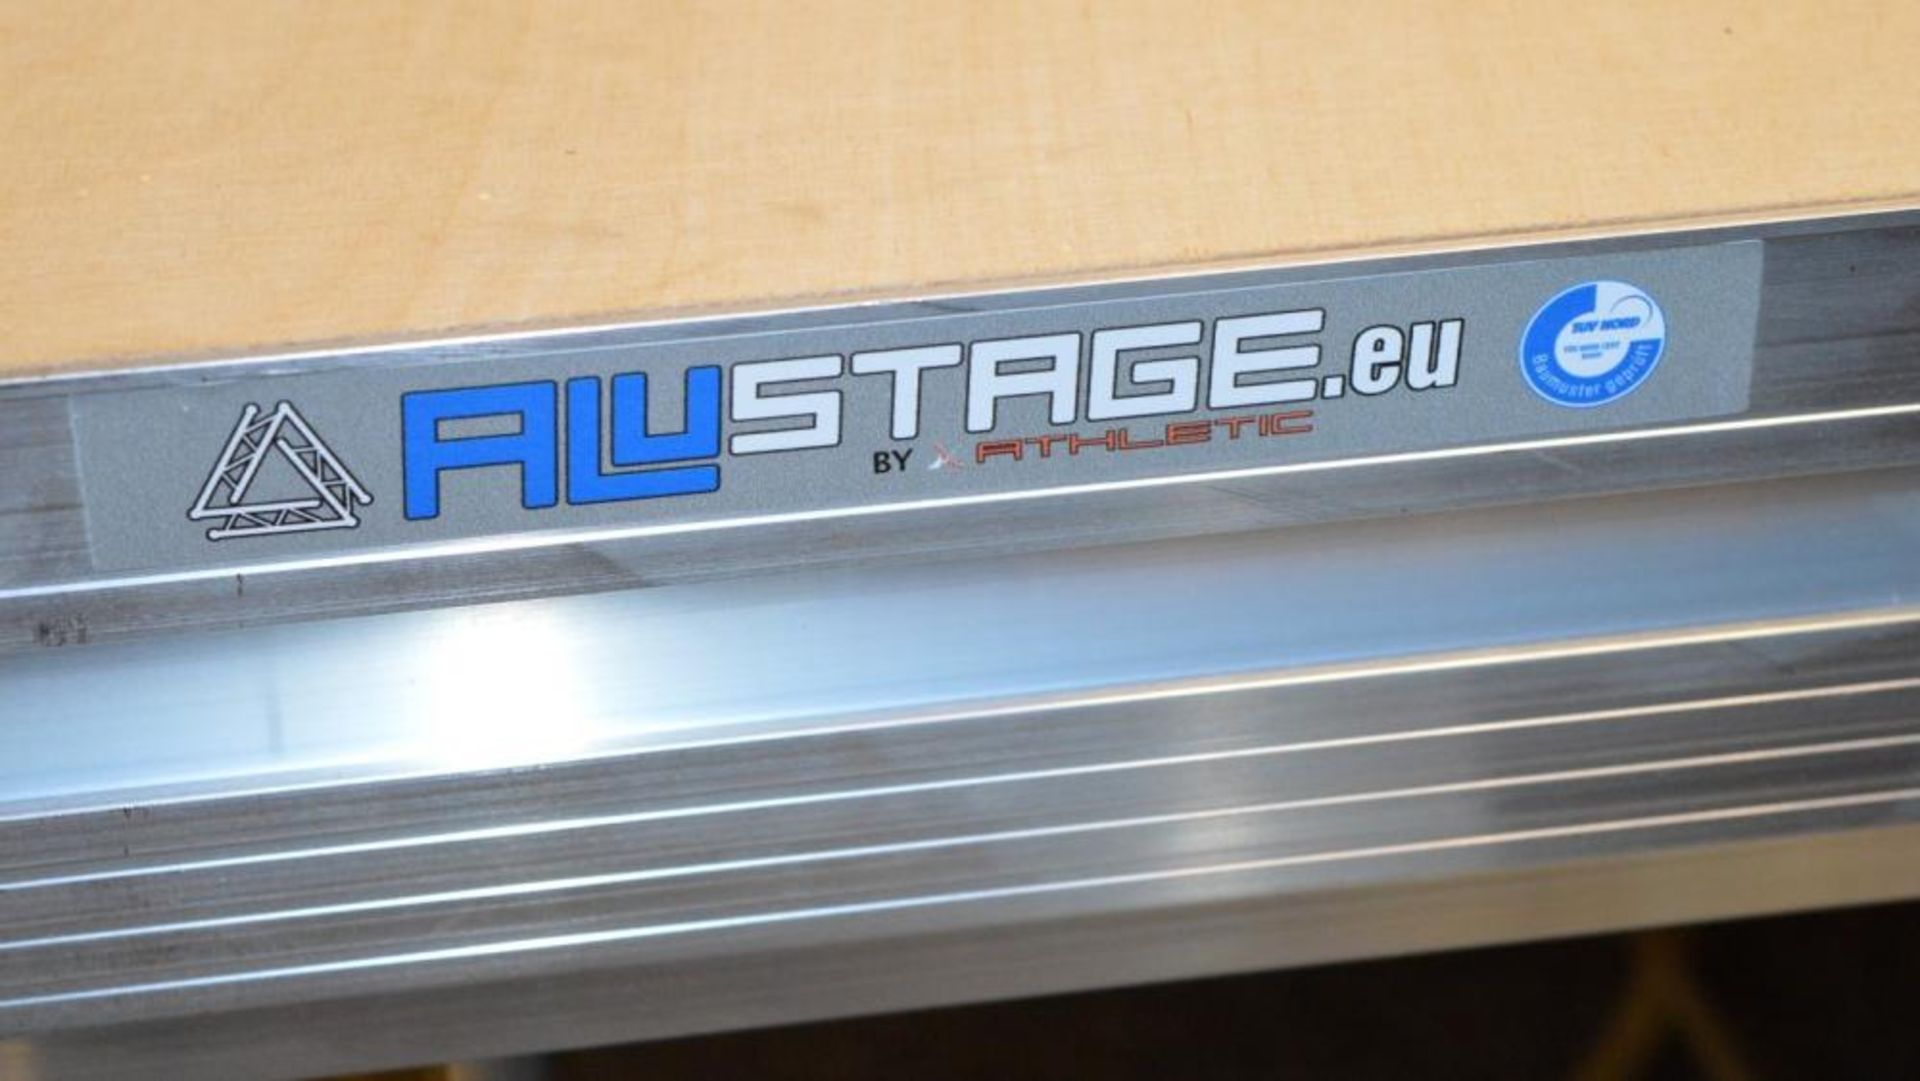 2 x Athletic Alustage Portable Stage Platforms - Aluminium Construction With Wood Finish Surface - - Image 6 of 7